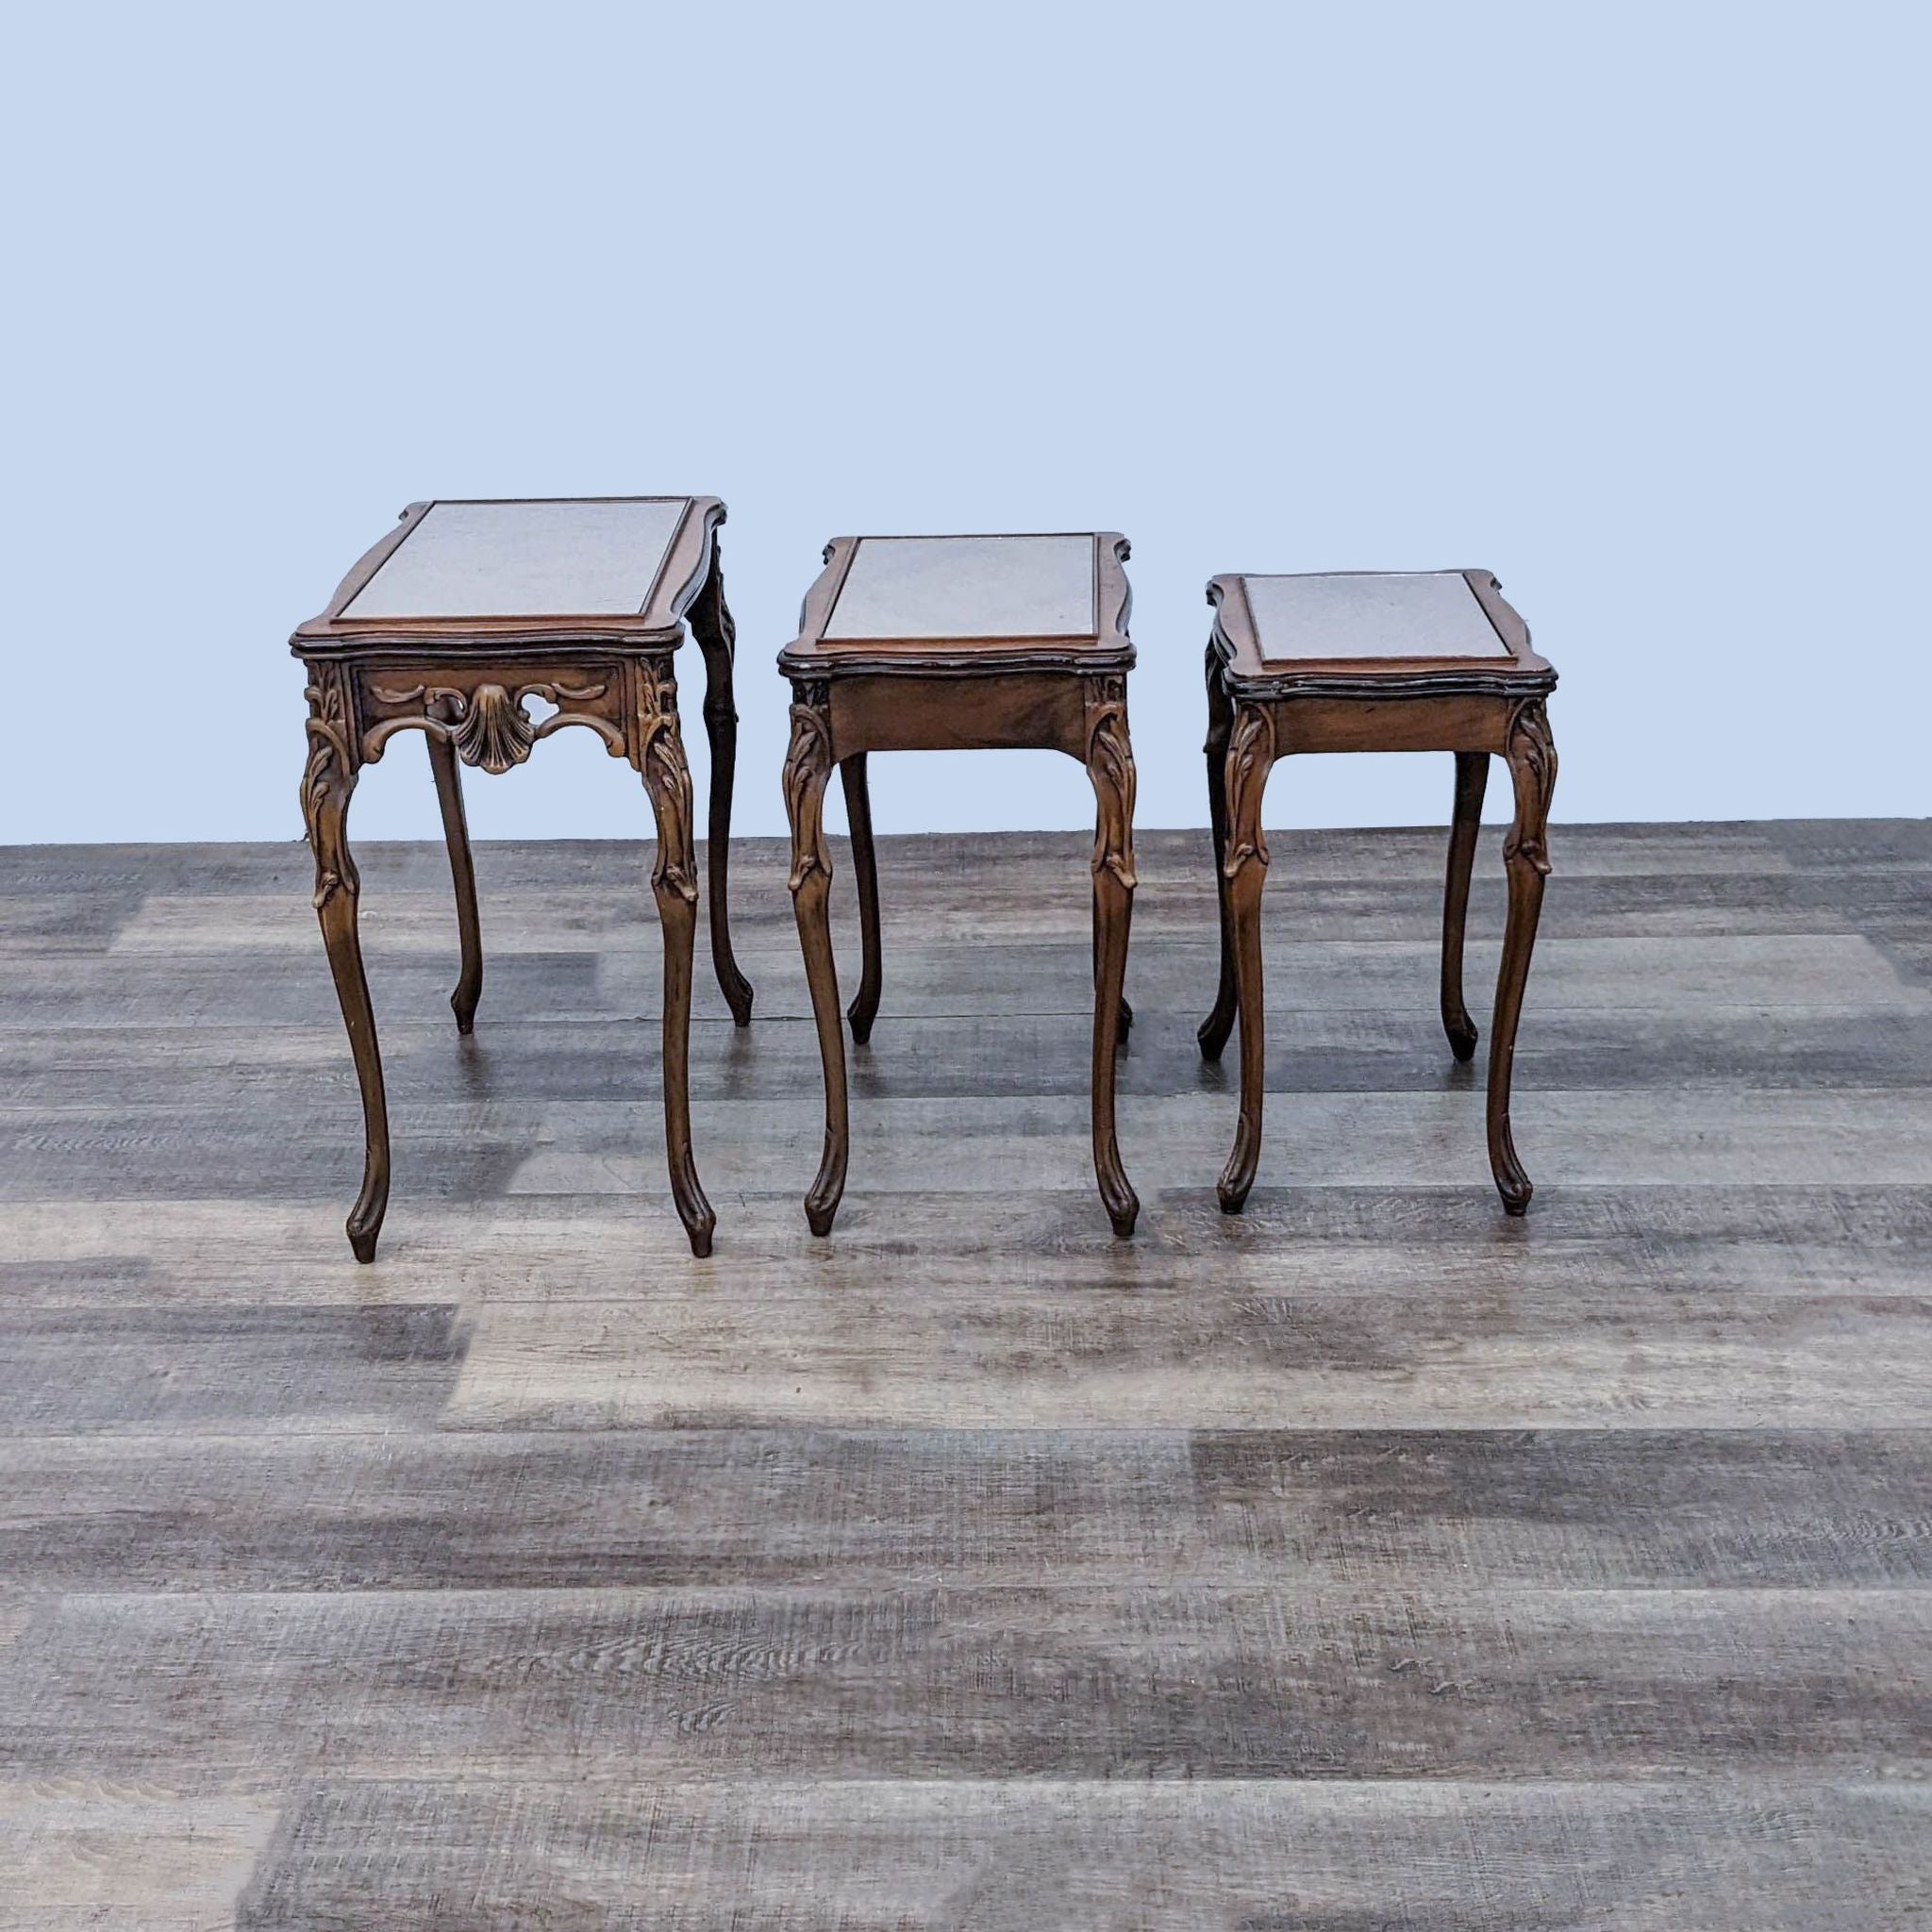 Set of three Reperch end tables with glass covers and detailed wooden legs, displayed in a row.